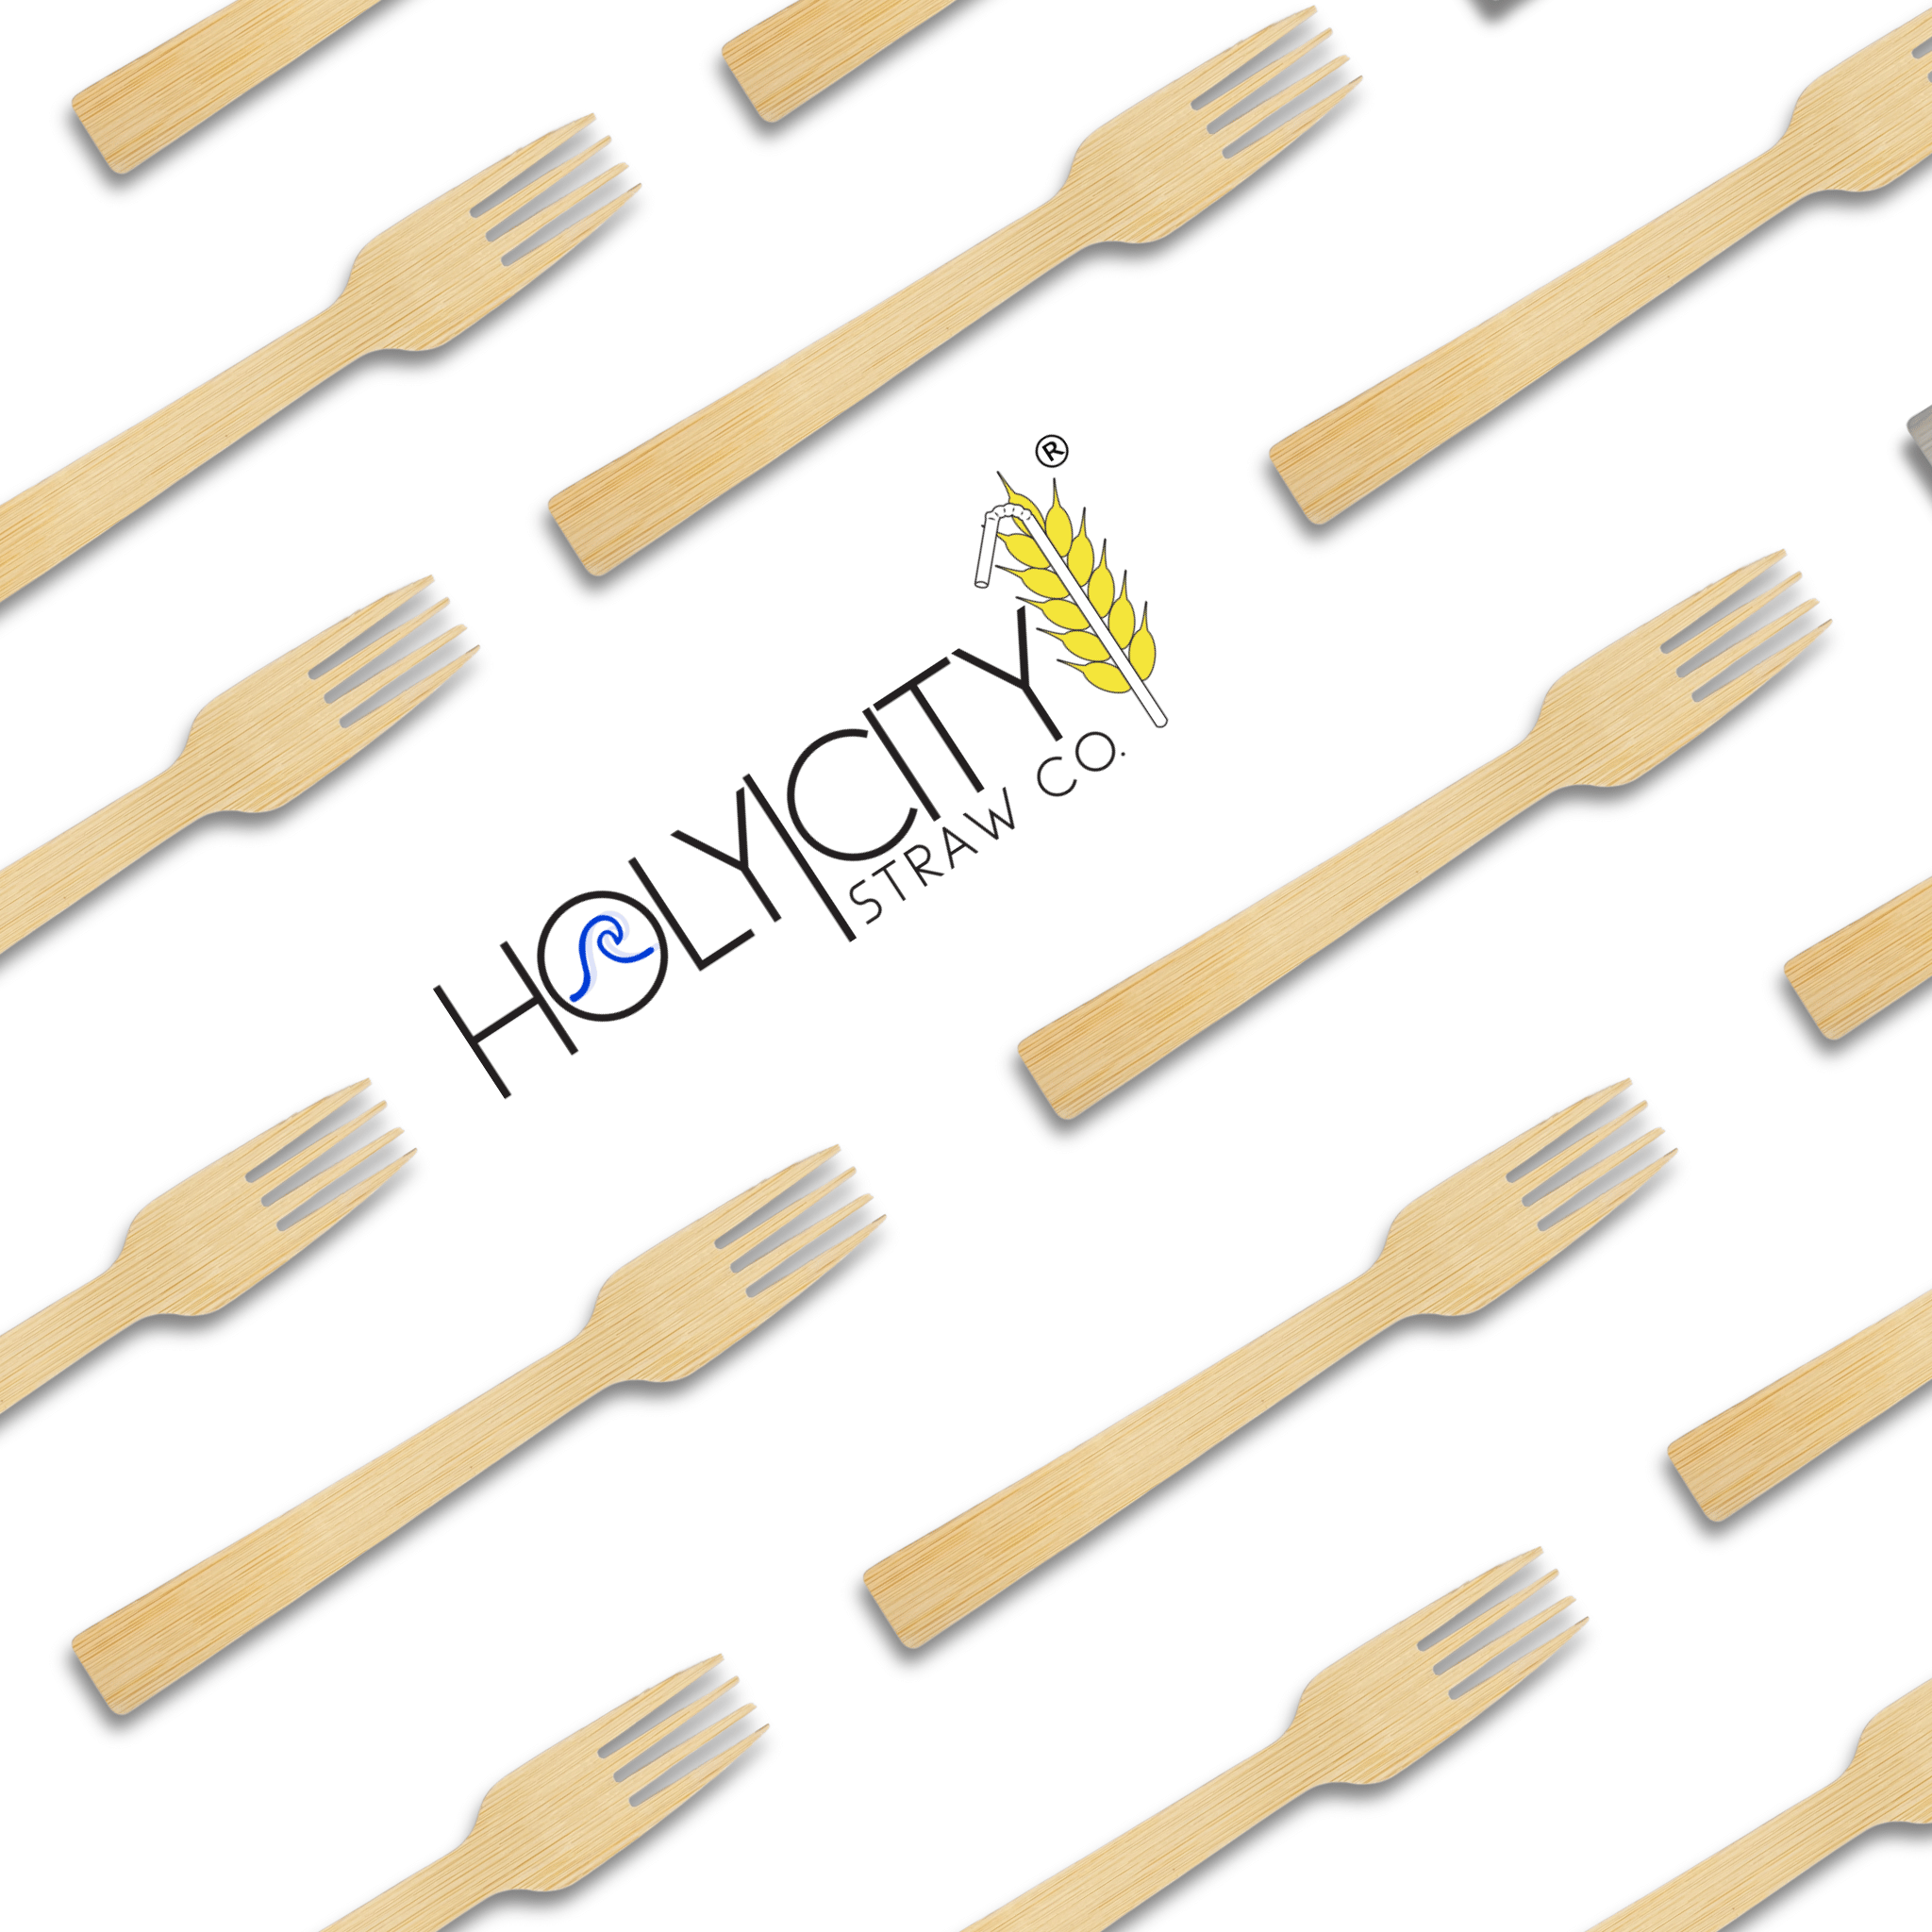 Holy City Straw Co. bamboo forks lined up on angle